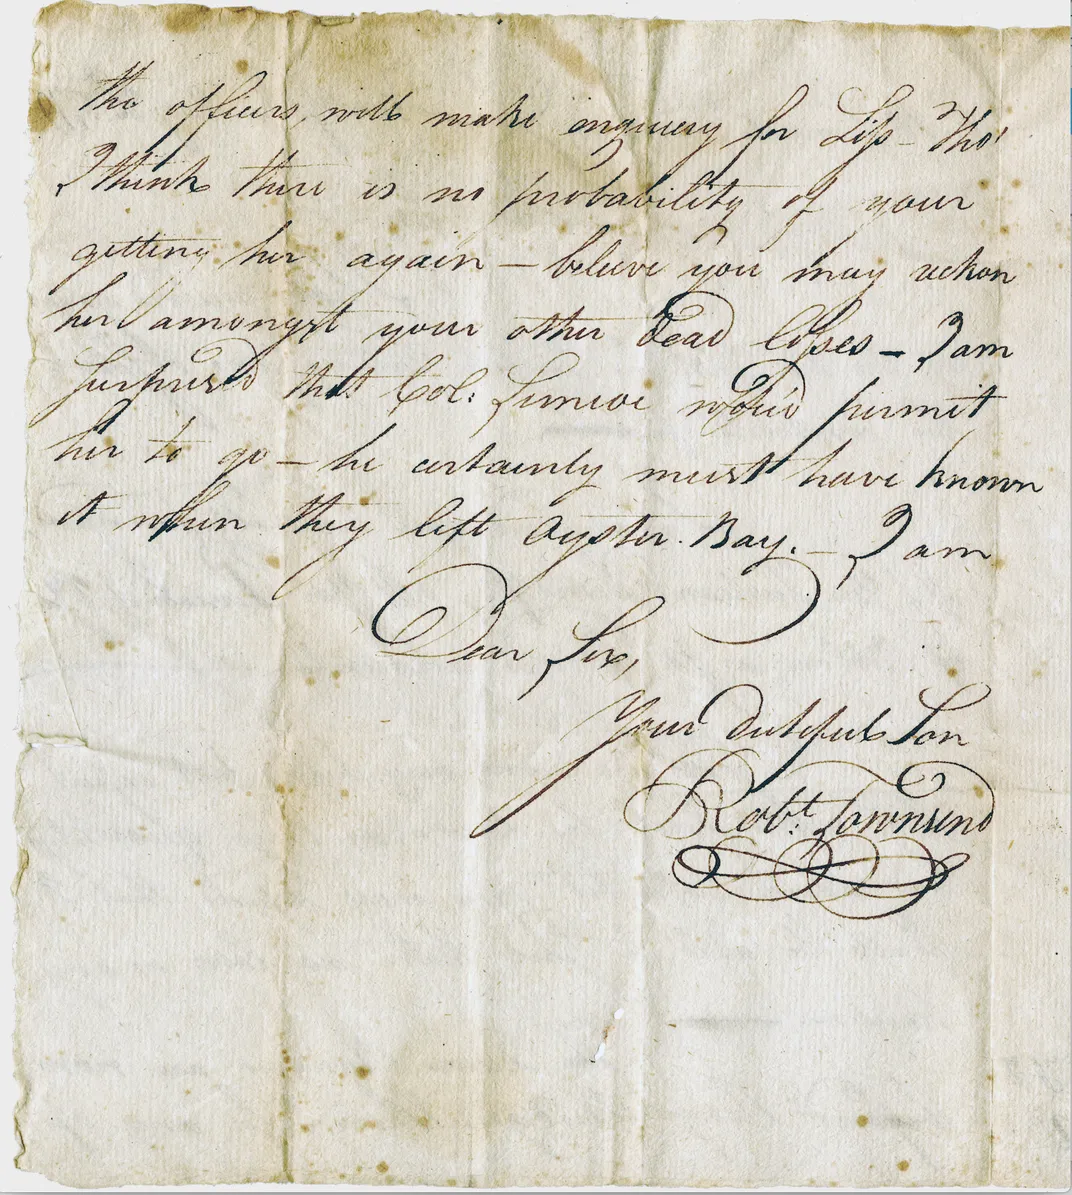 May 26, 1779 letter from Robert Townsend to his father, Samuel Townsend